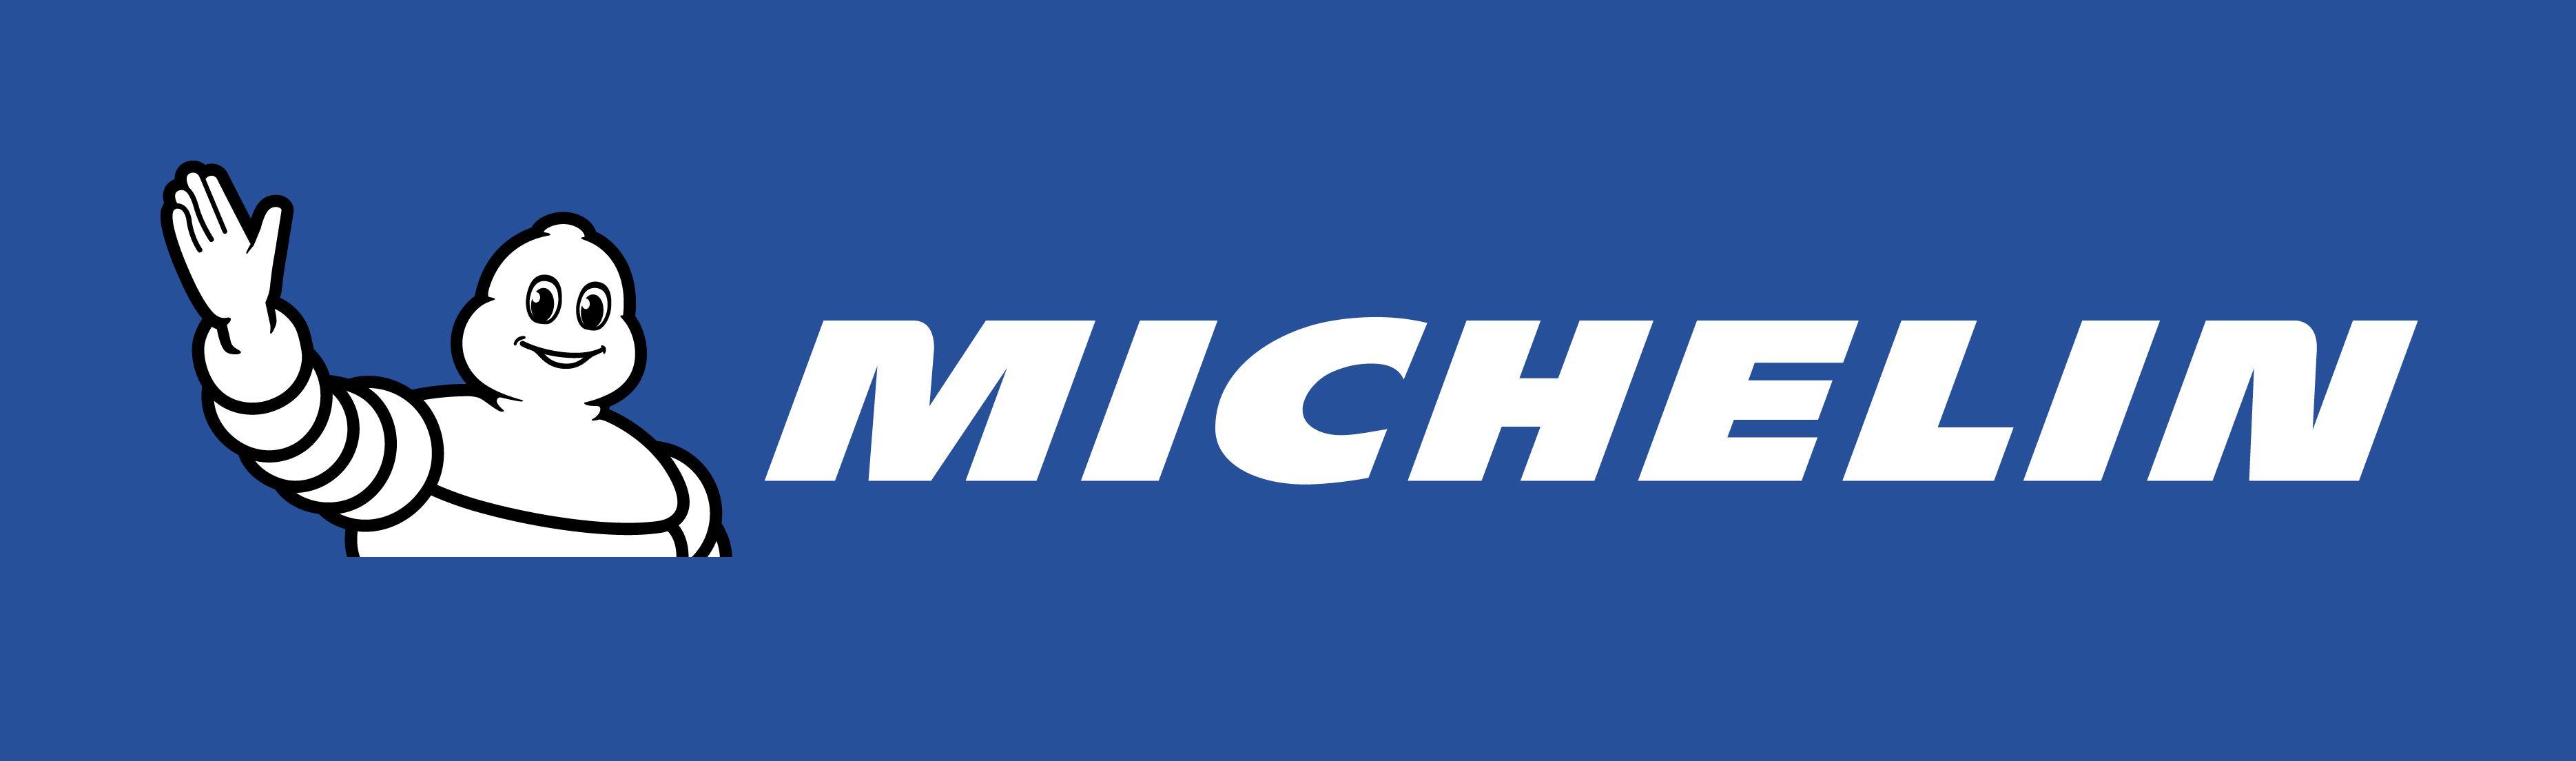 Later Logo - Meaning Michelin logo and symbol | history and evolution